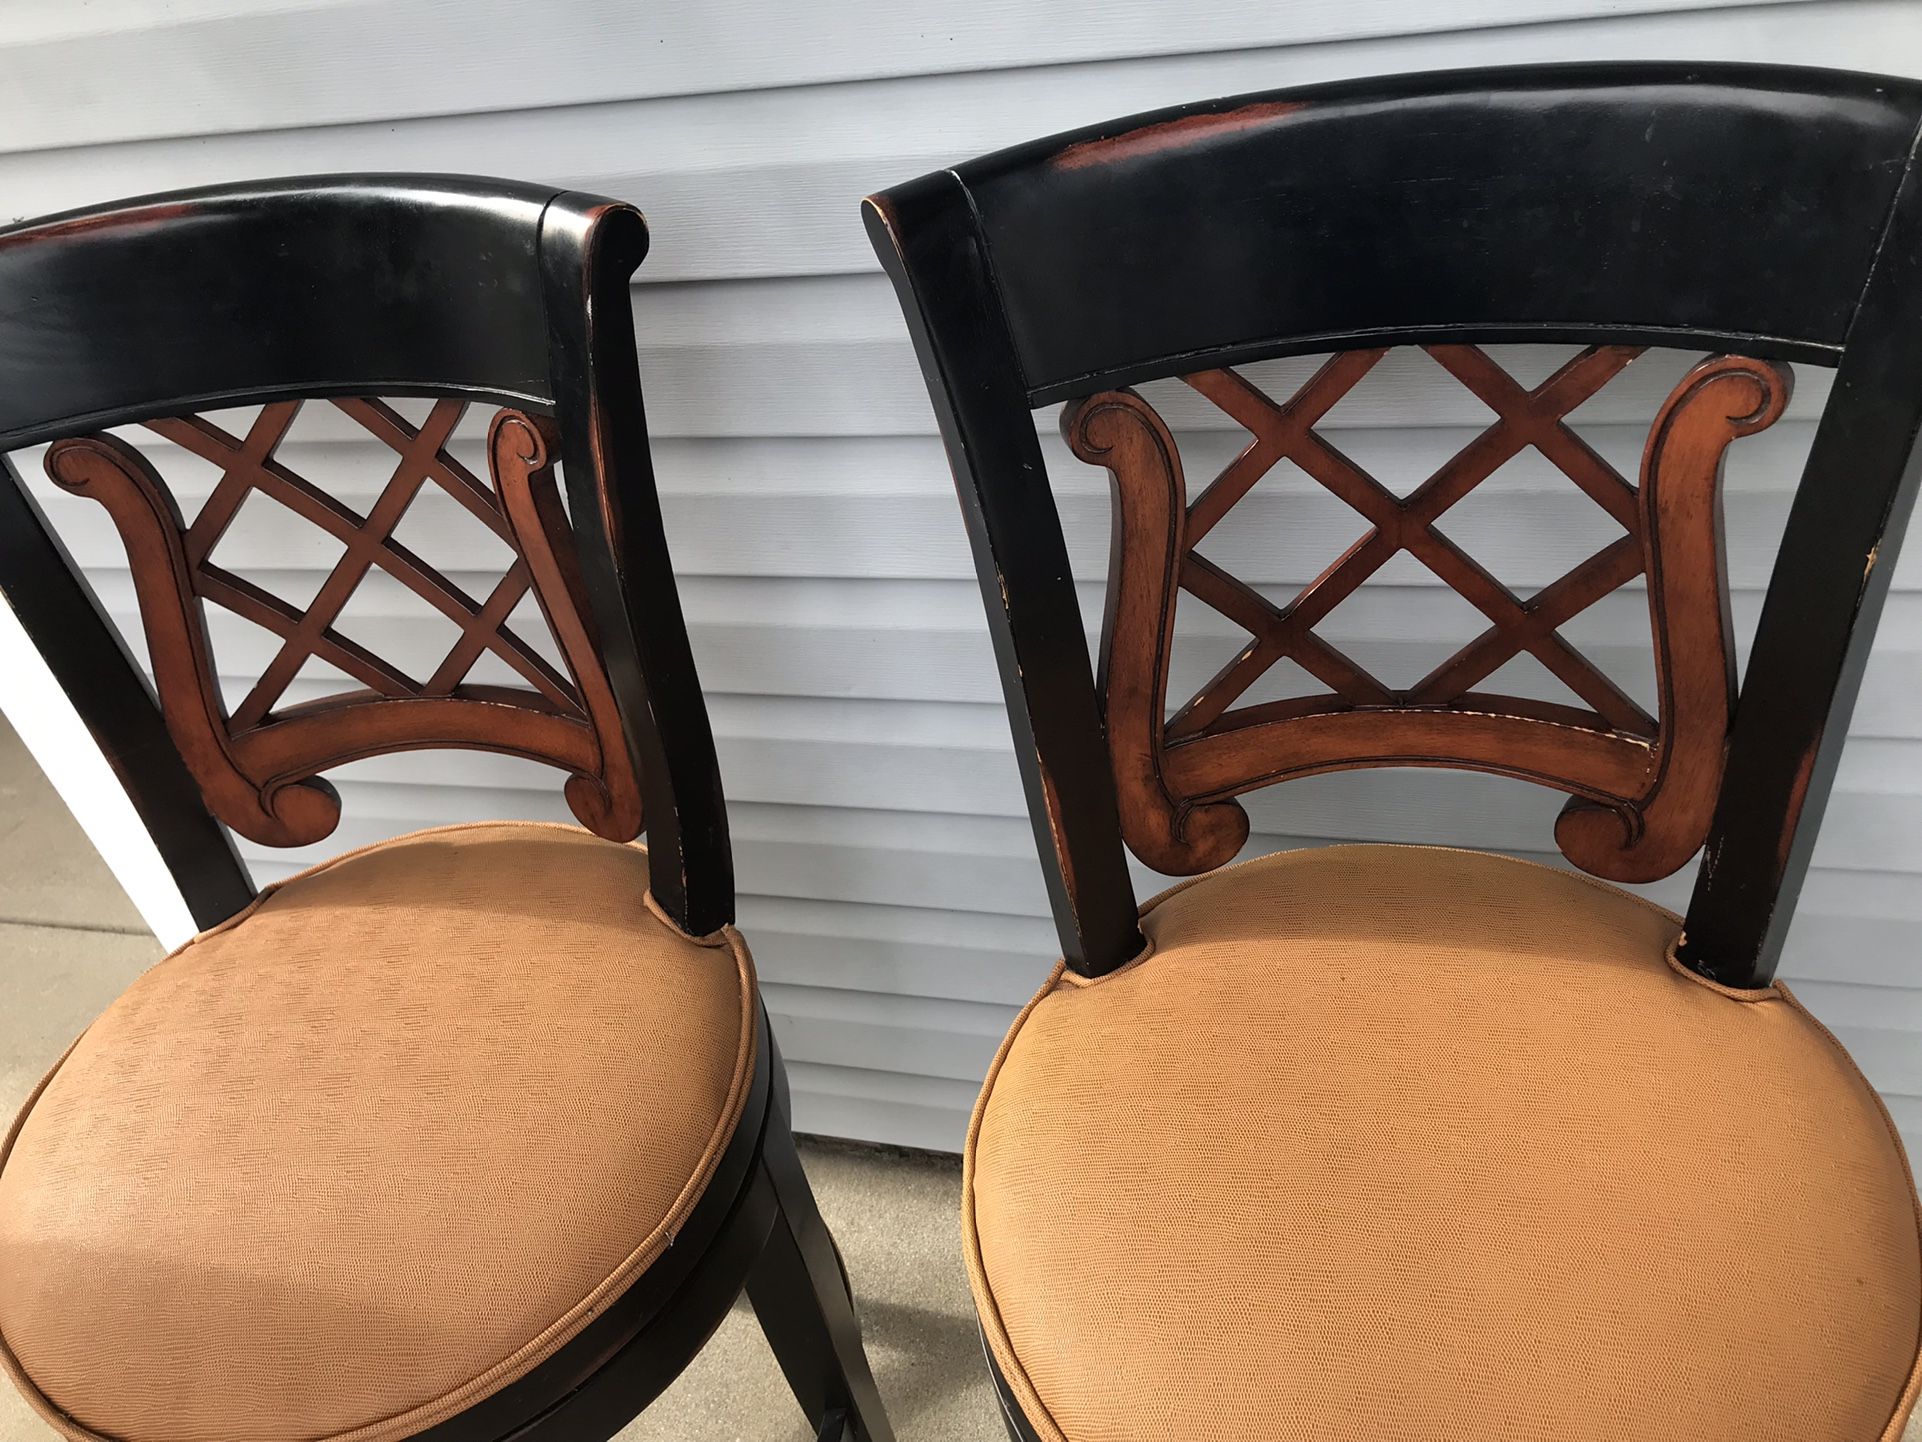 Two Wooden Bar Chair $50 For Both 